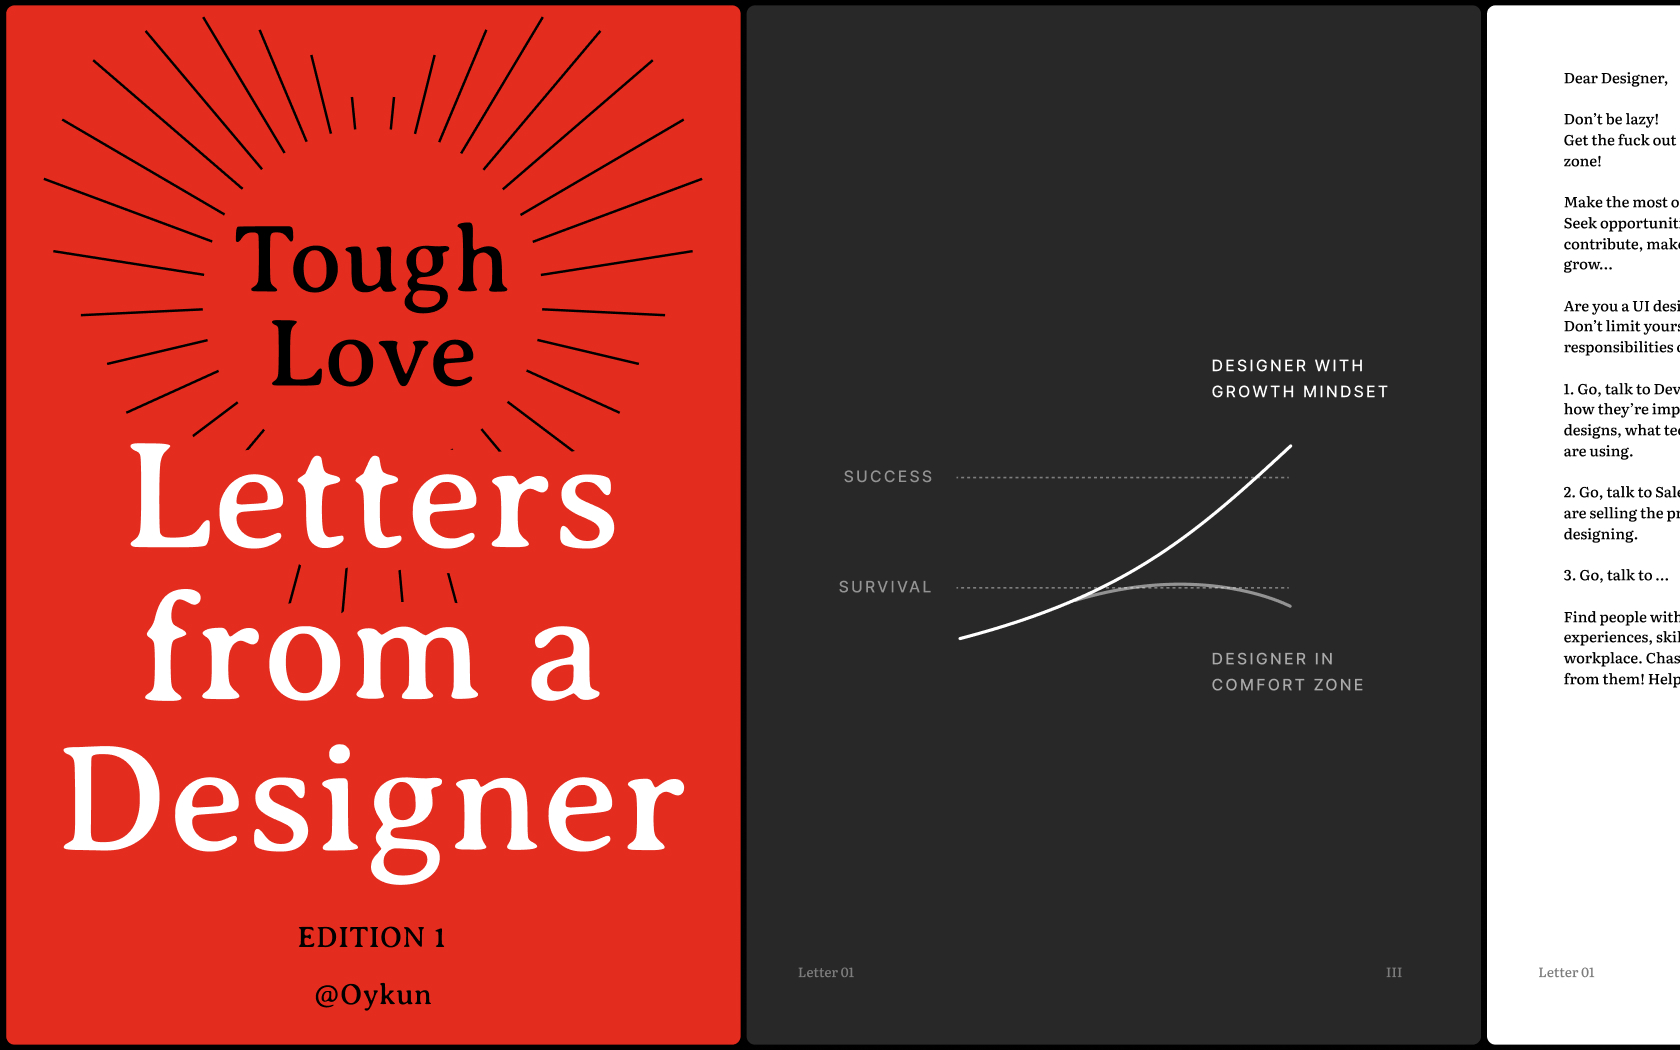 Tough Love Letters from a Designer